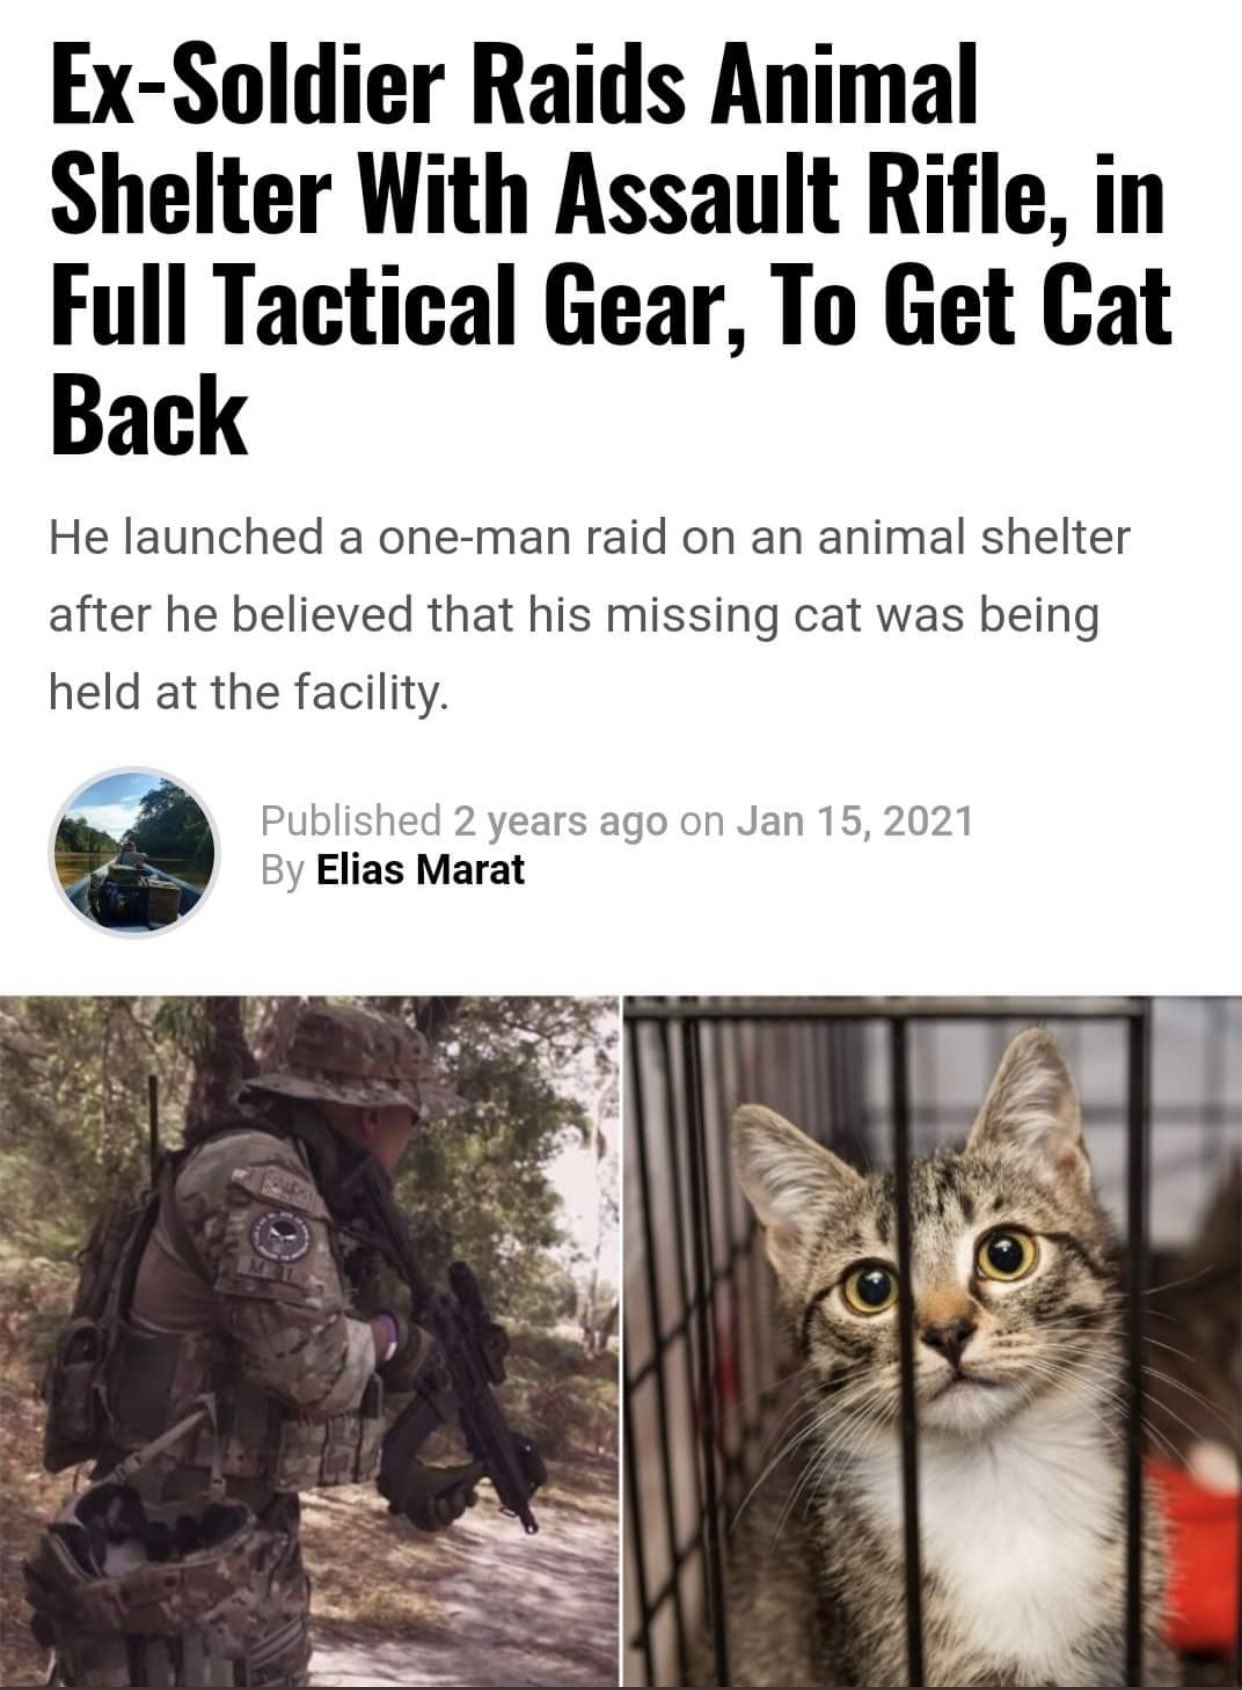 Dudes posting their wins - ex soldier raids animal shelter - ExSoldier Raids Animal Shelter With Assalt Rifle, in Full Tactical Gear, To Get Cat Back He launched a oneman raid on an animal shelter after he believed that his missing cat was being held at t